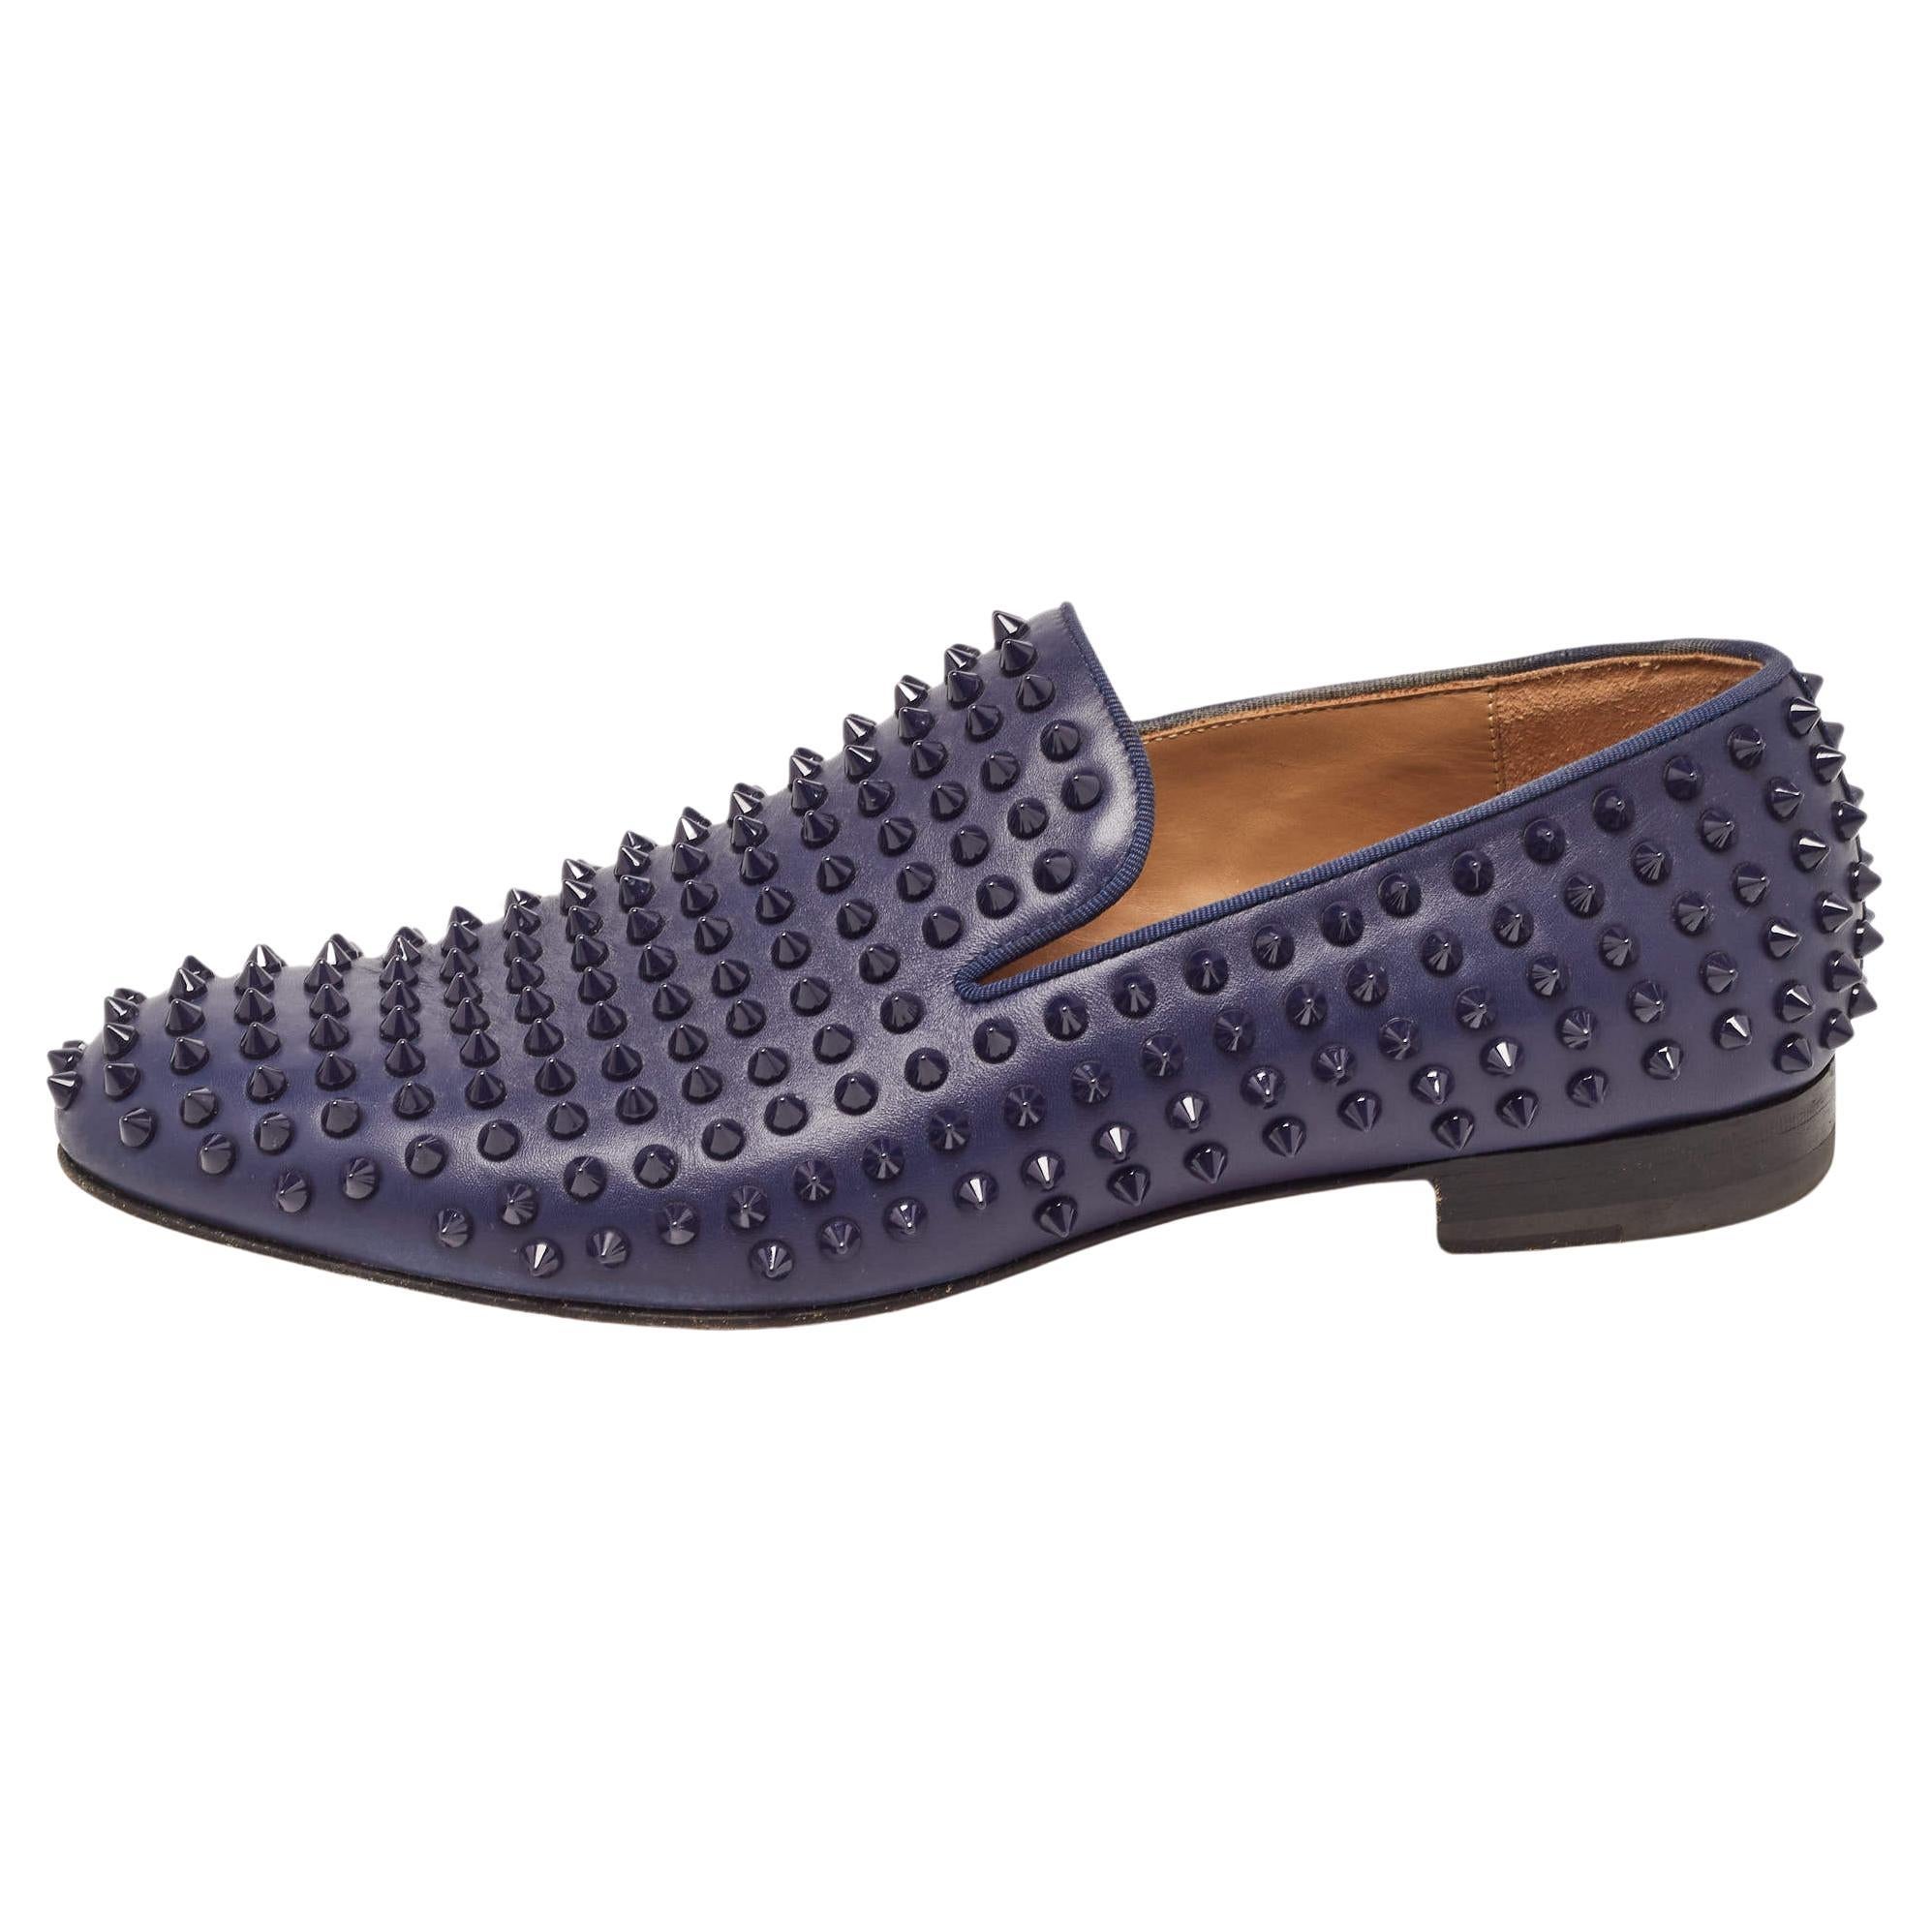 Christian Louboutin Navy Blue Leather Dandelion Spike Smoking Slippers Size 42.5 For Sale